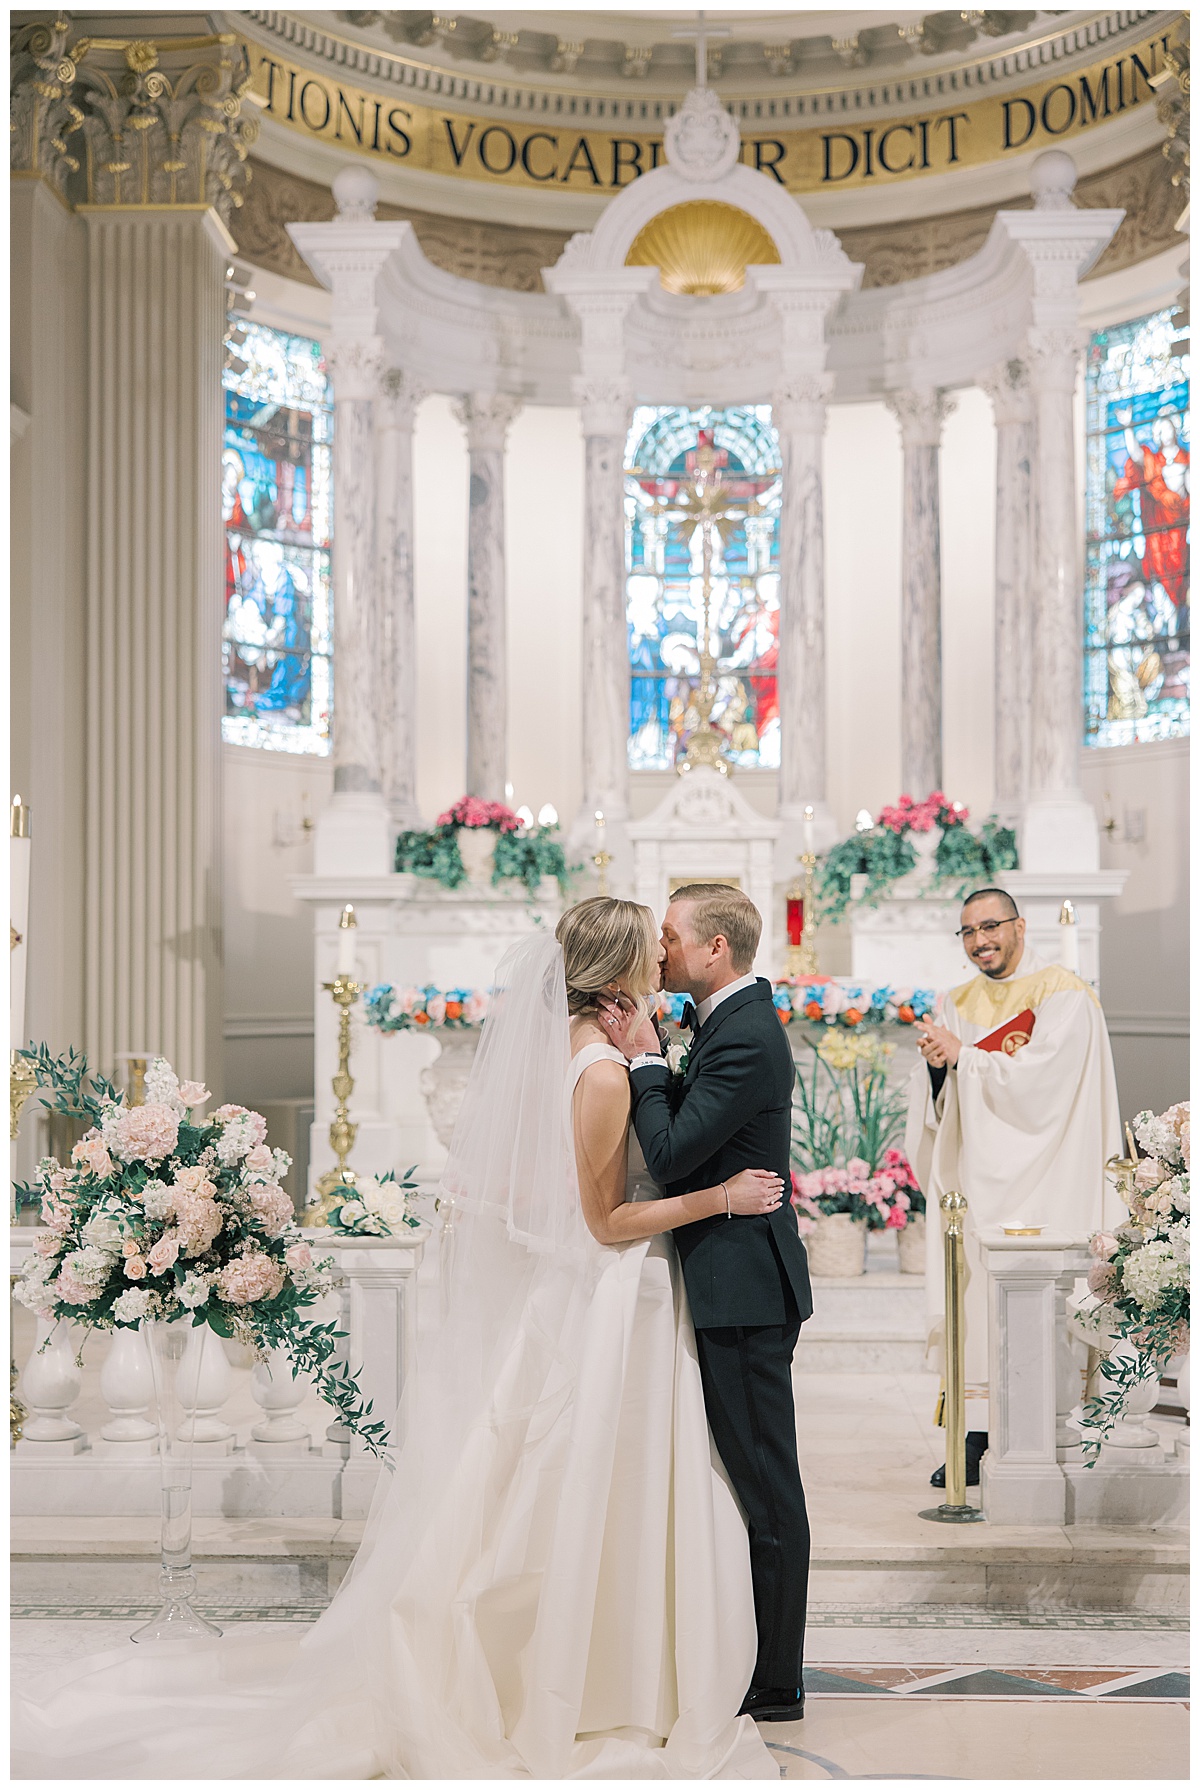 Bride and groom first kiss at St. Catharine Church in Spring Lake, NJ.